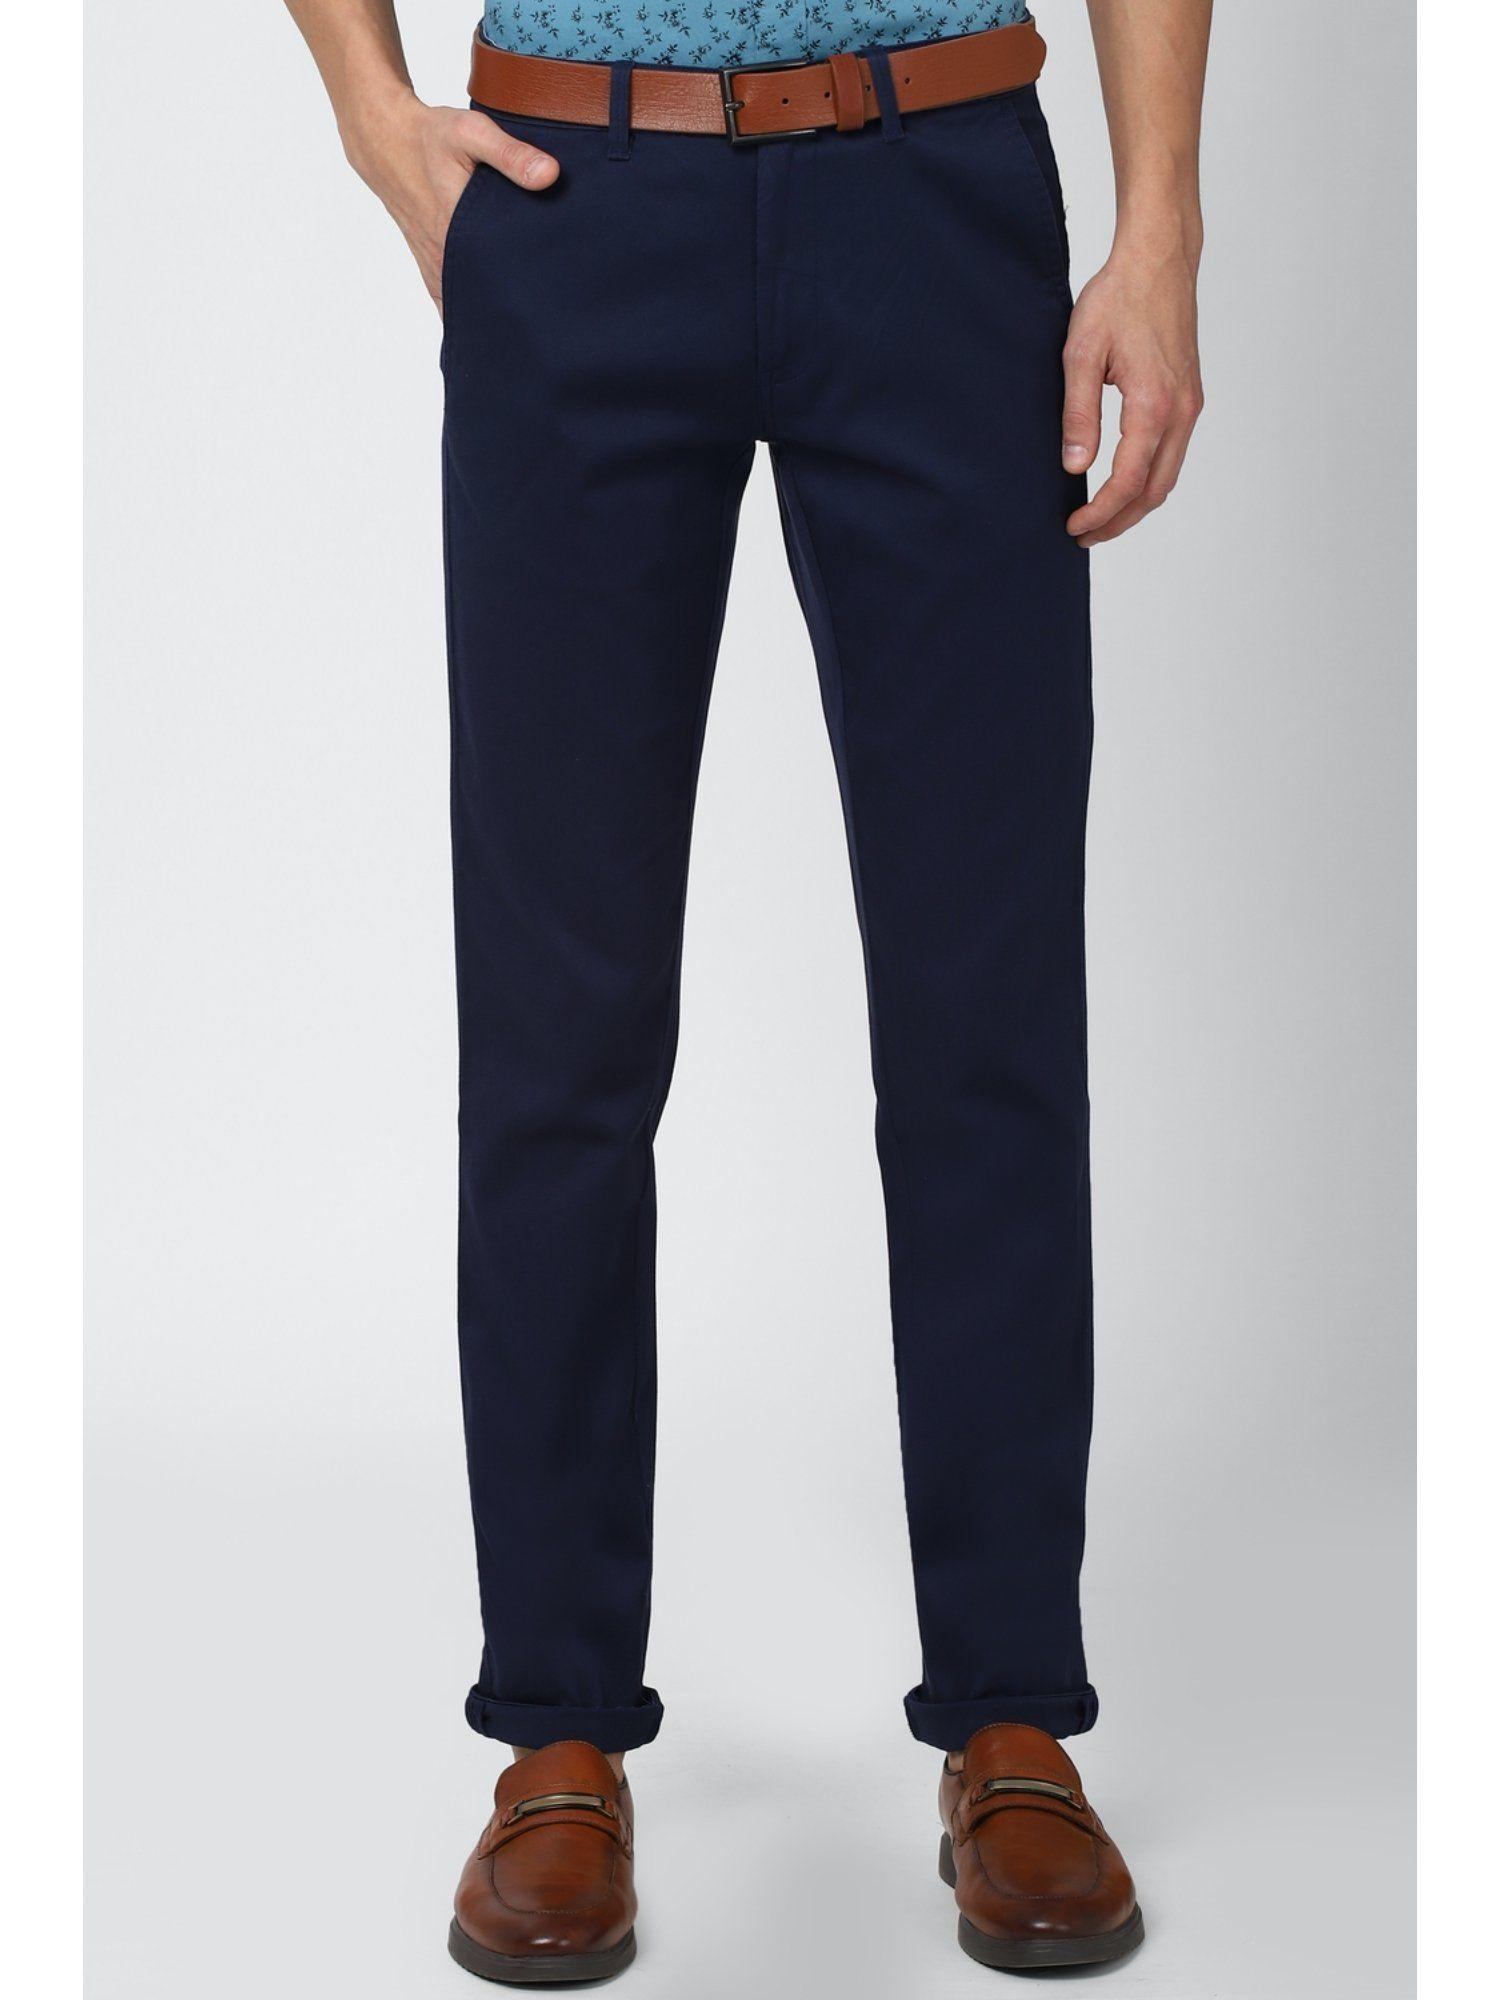 navy blue casual trouser